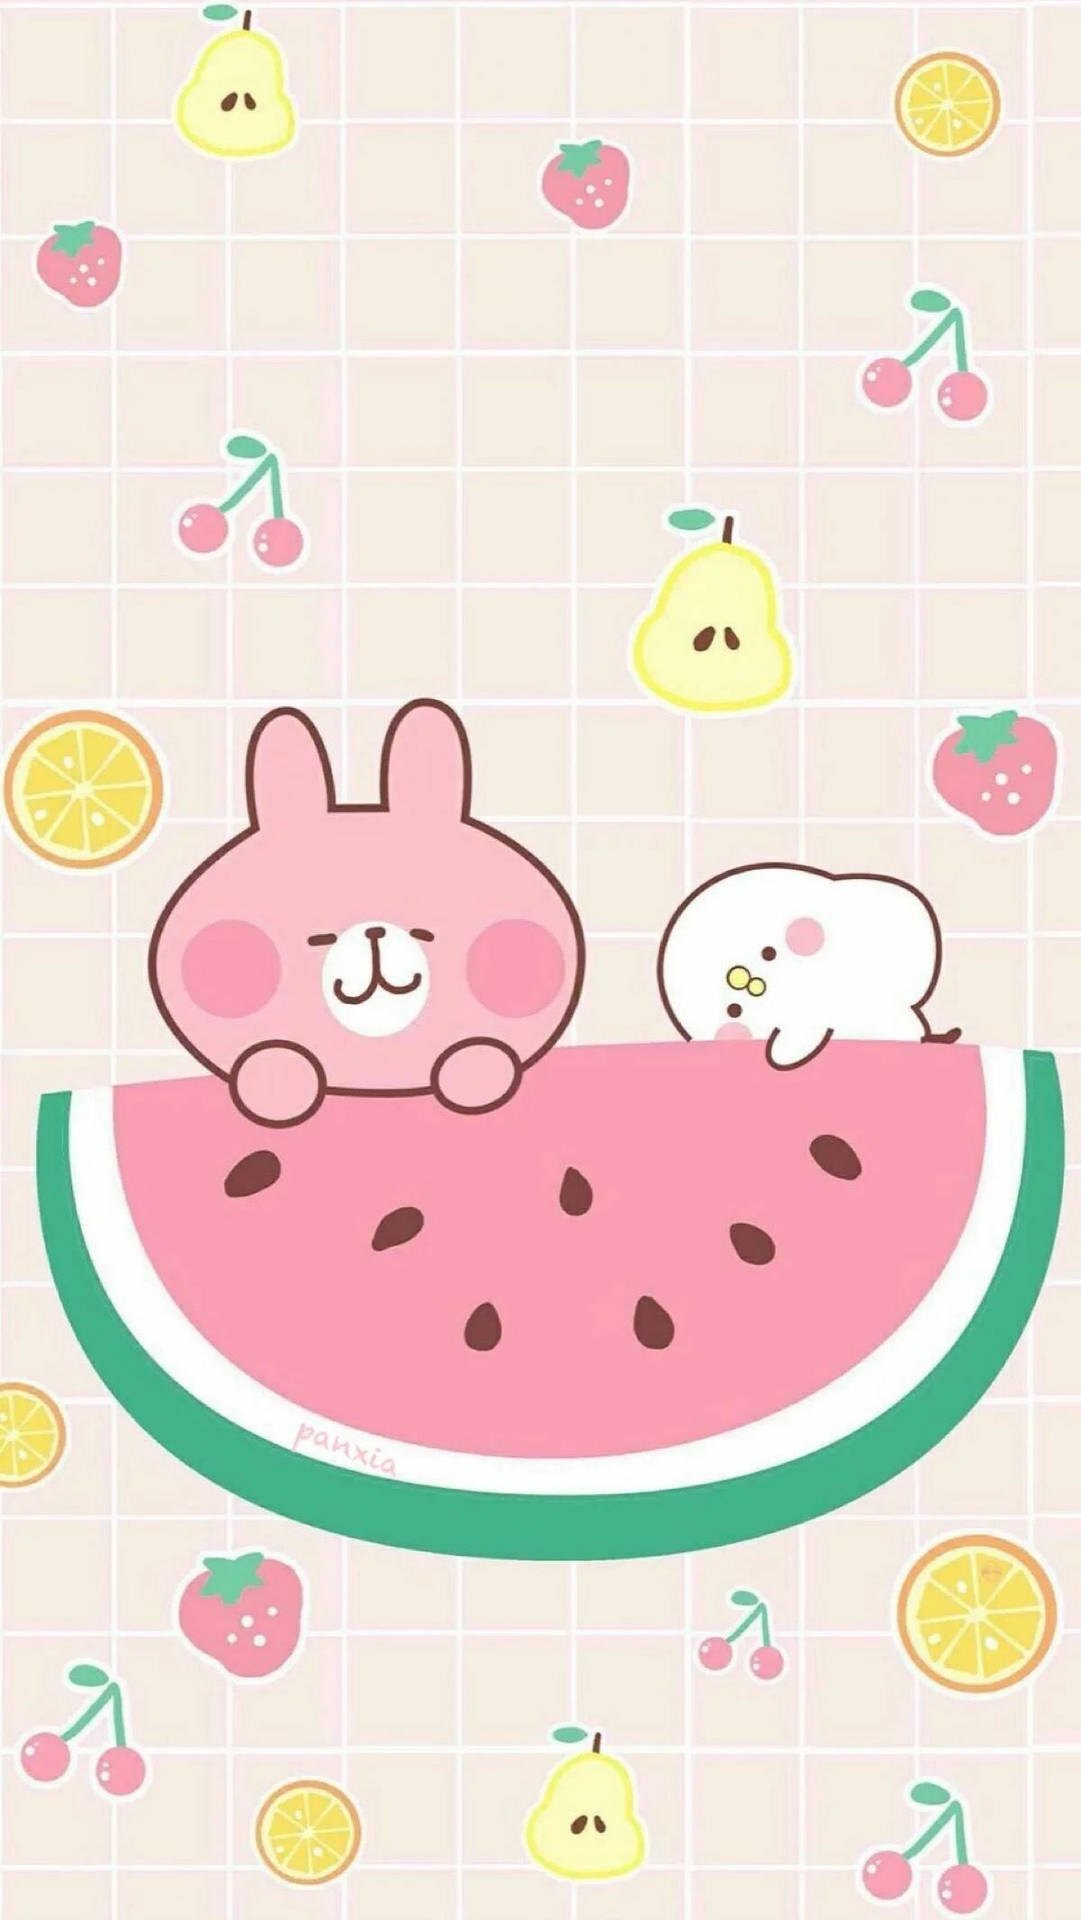 Enjoy The Beauty Of This Cute Kawaii Aesthetic Background